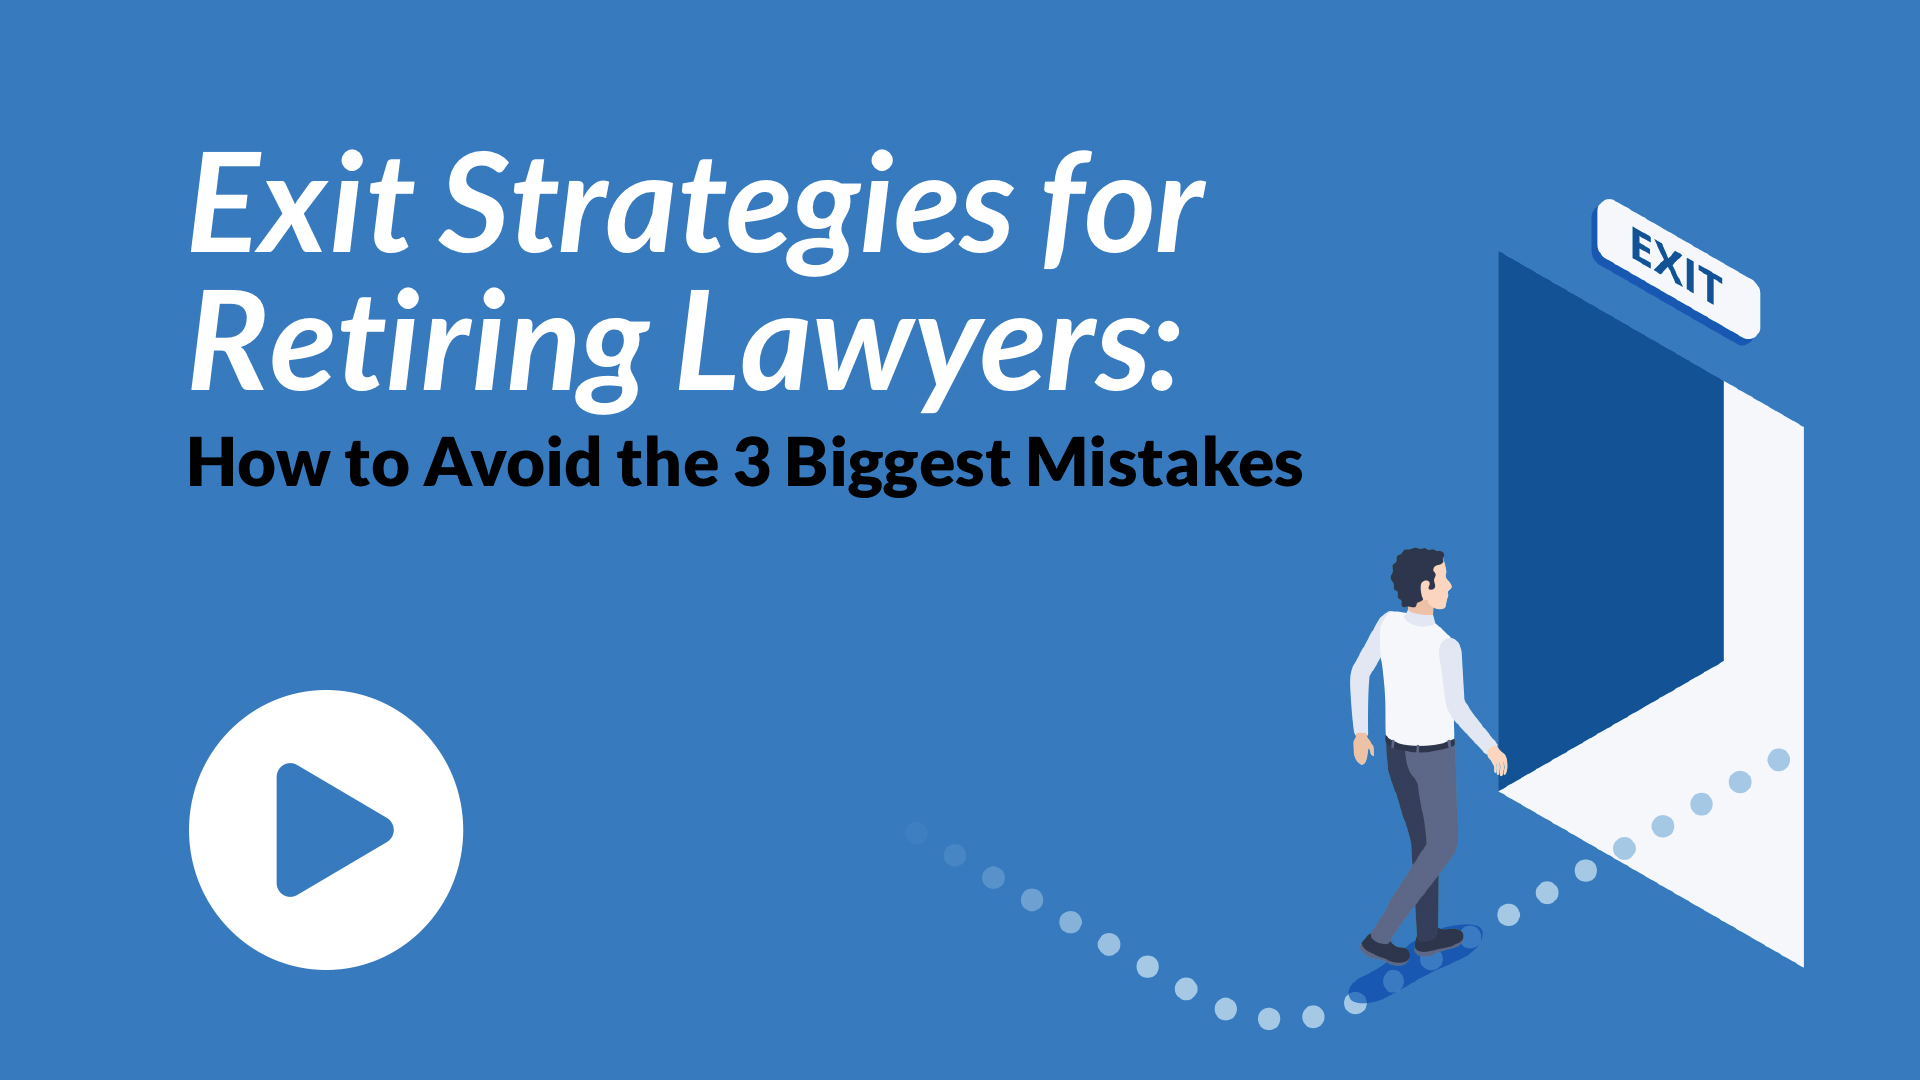 Exit Strategies for Retiring Lawyers